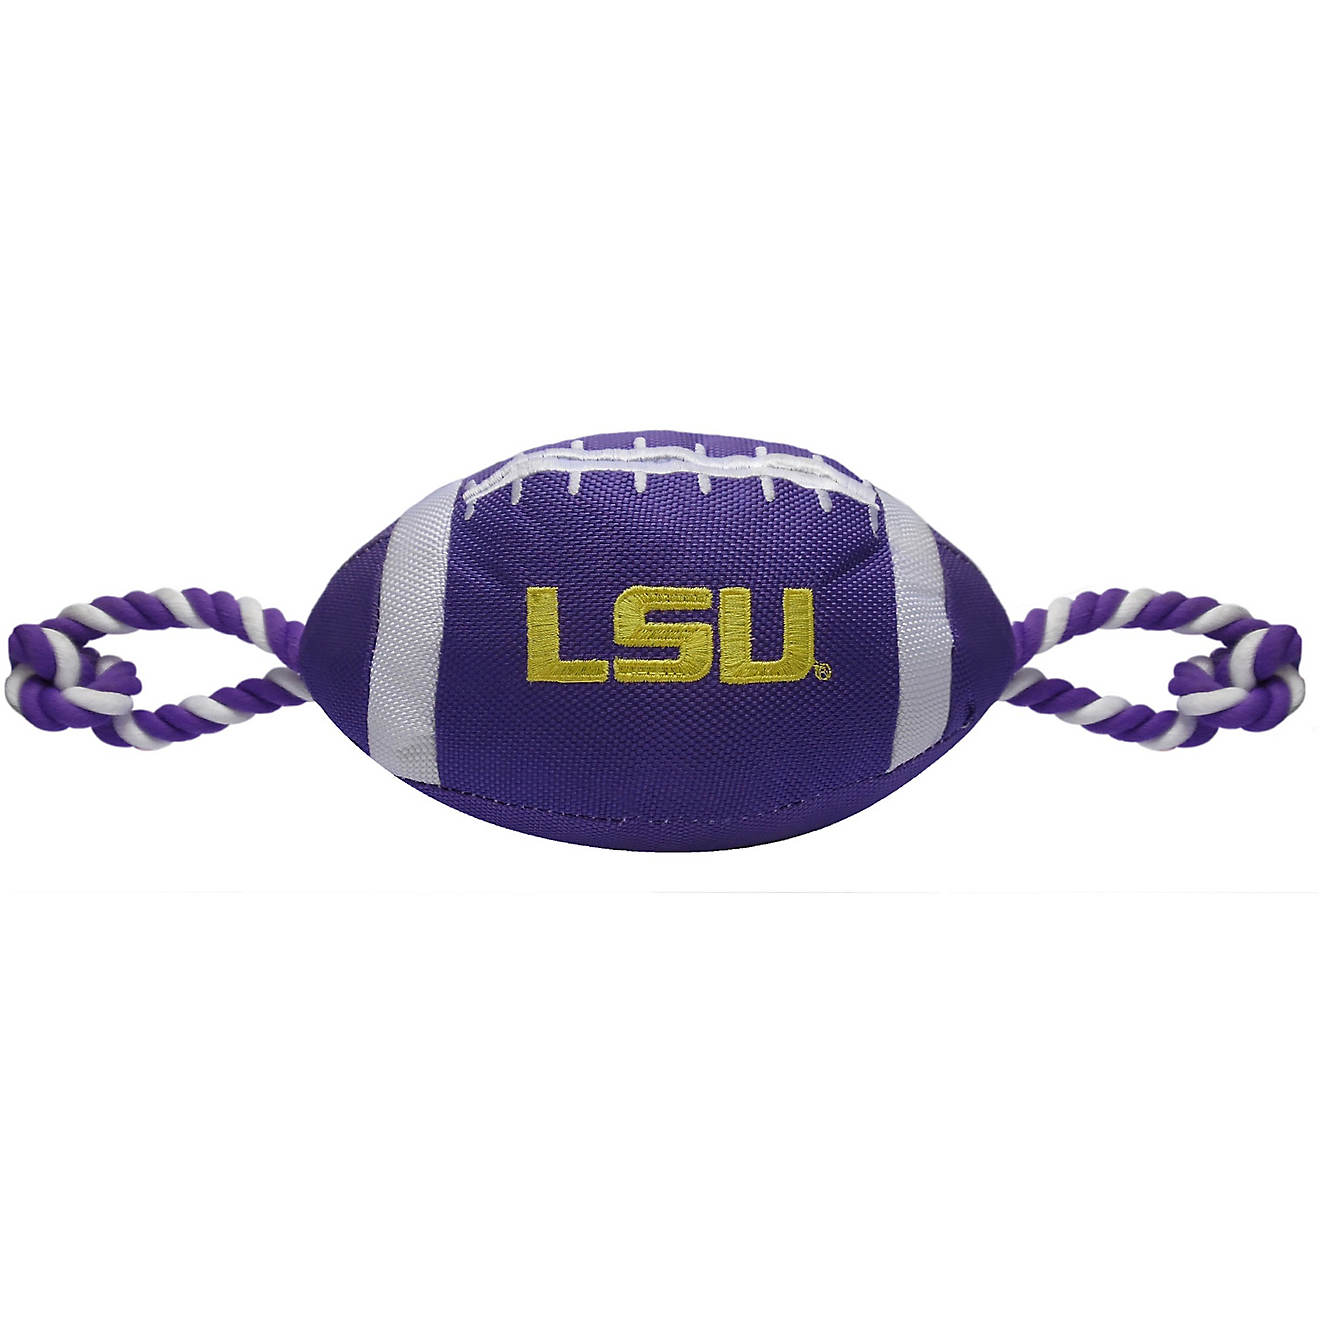 Pets First Louisiana State University Nylon Football Rope Toy                                                                    - view number 1